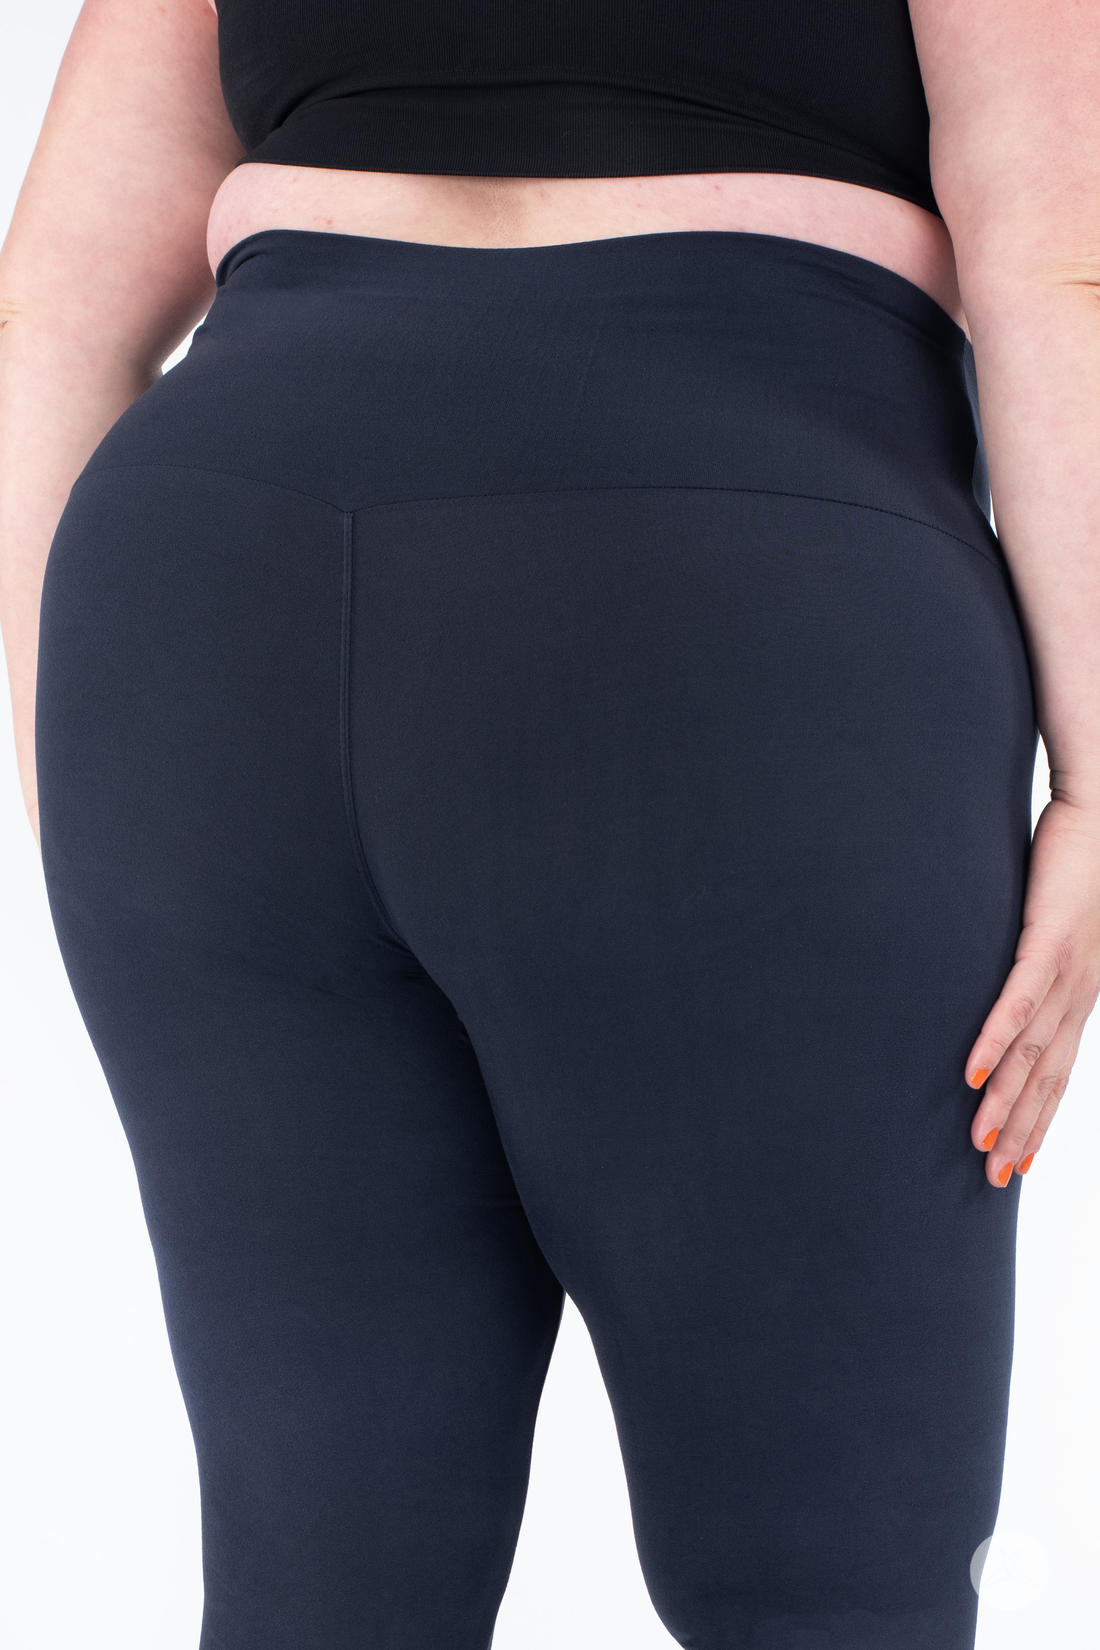 Amazon.com: THE GYM PEOPLE Thick High Waist Yoga Pants with Pockets, Tummy  Control Workout Running Yoga Leggings for Women (X-Small, Black) :  Clothing, Shoes & Jewelry